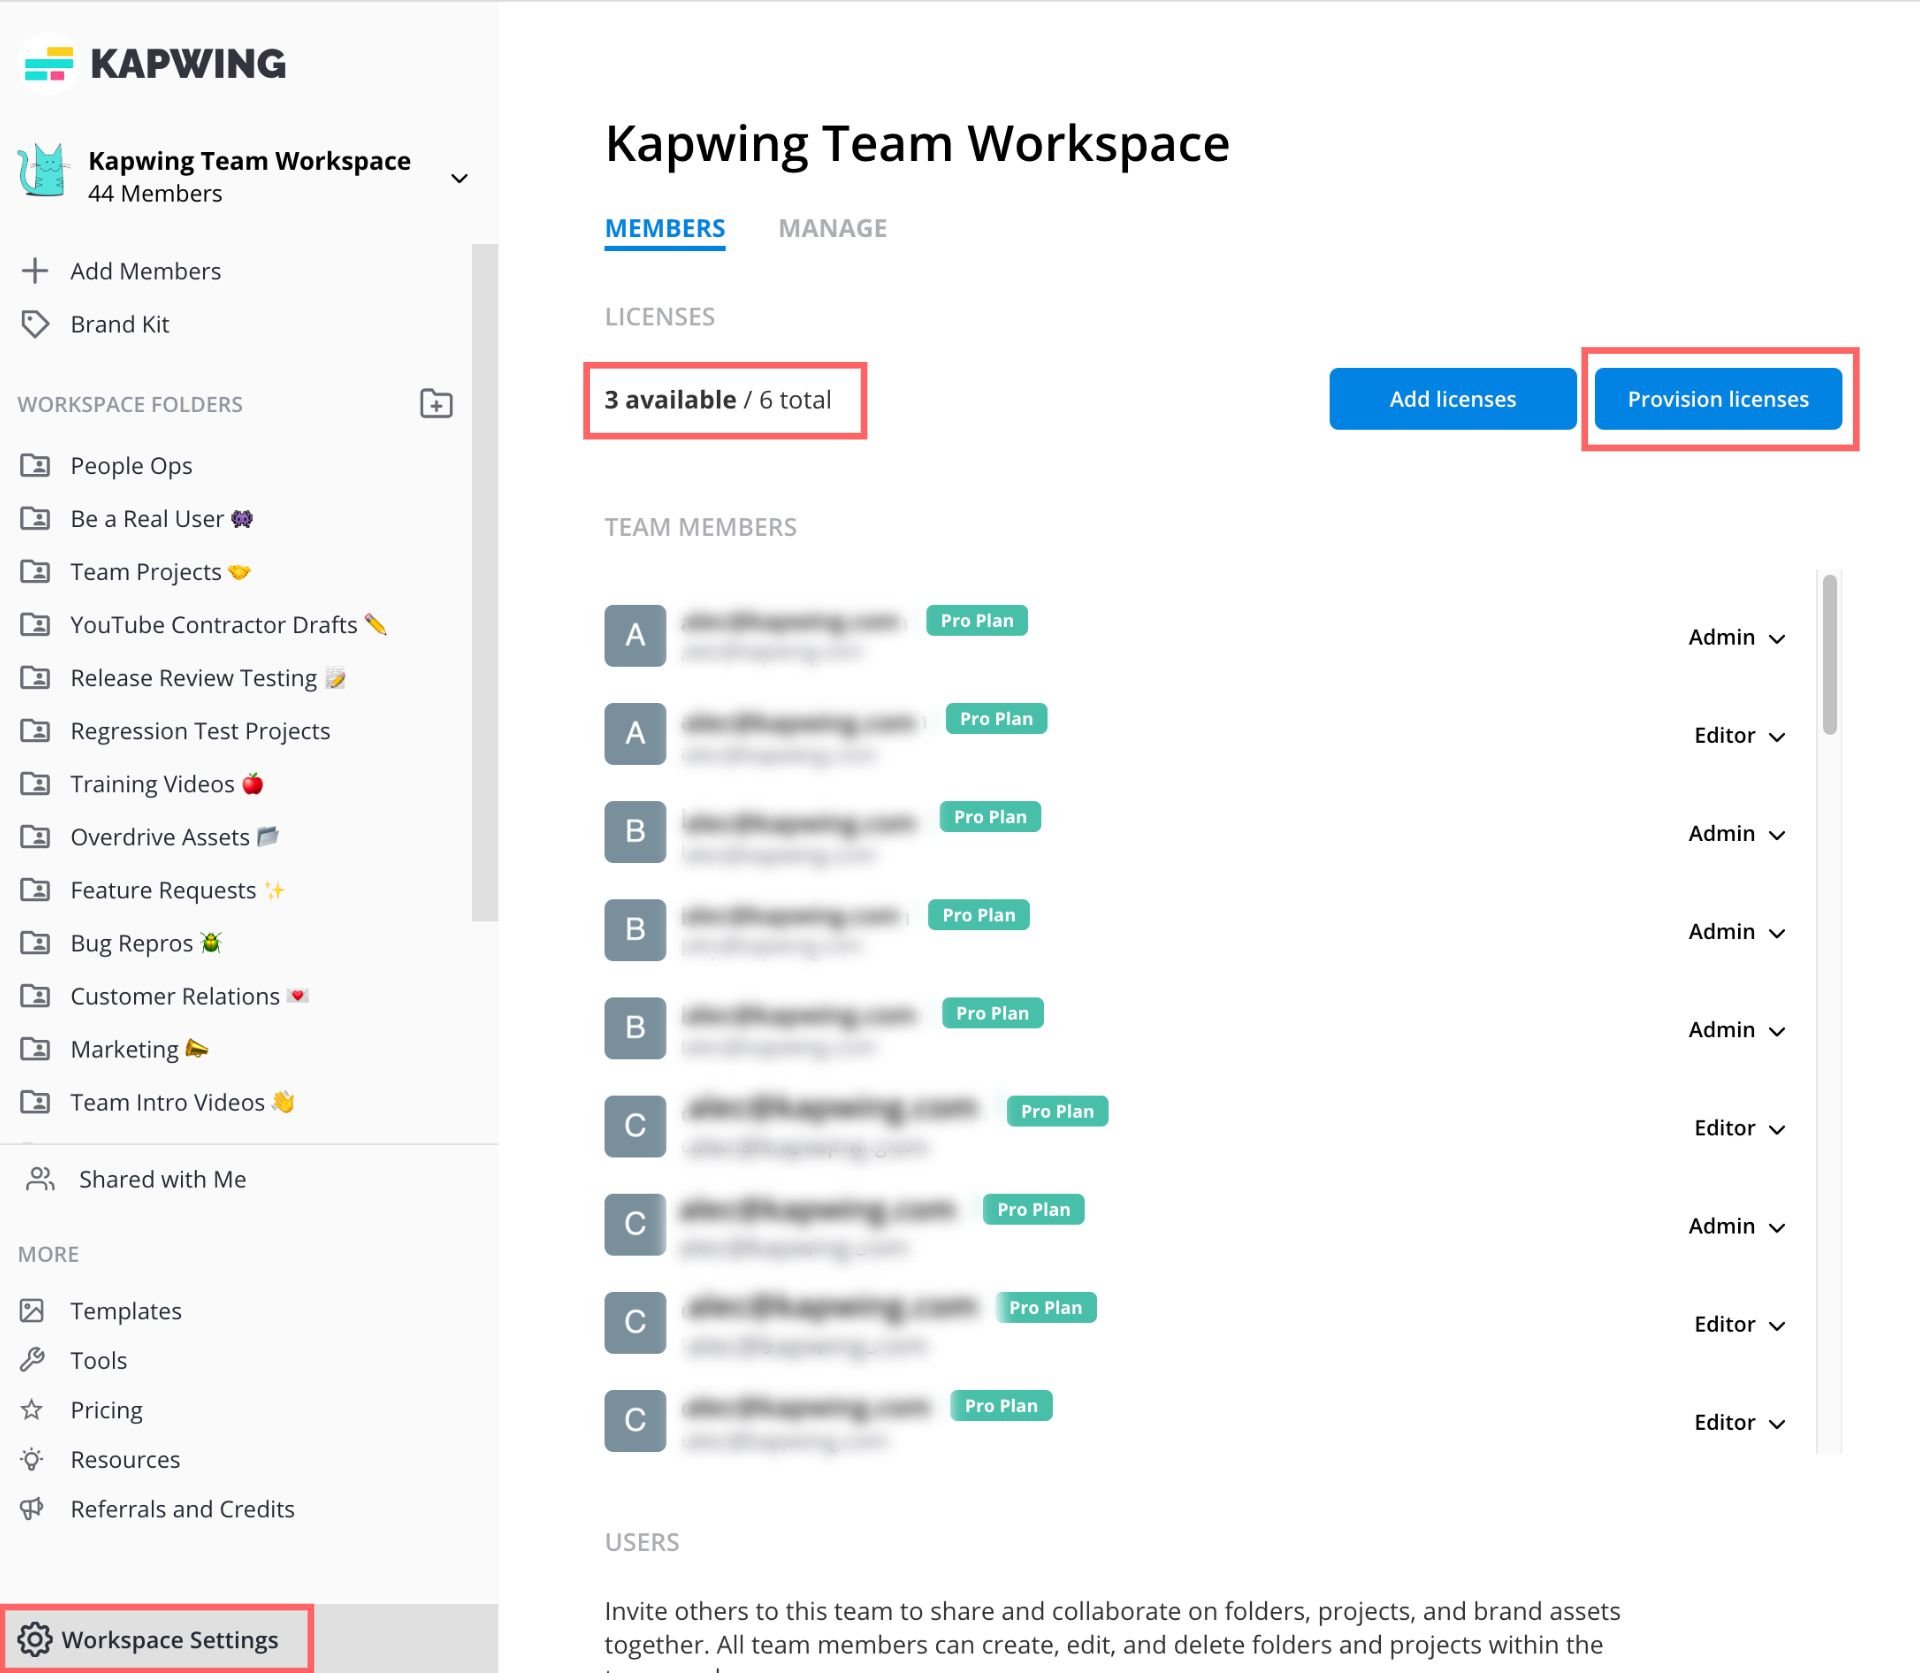 The Team page shows the currently available licenses, how many total team licenses and a purple button that says "Provision licenses" to apply an available license to a Team member